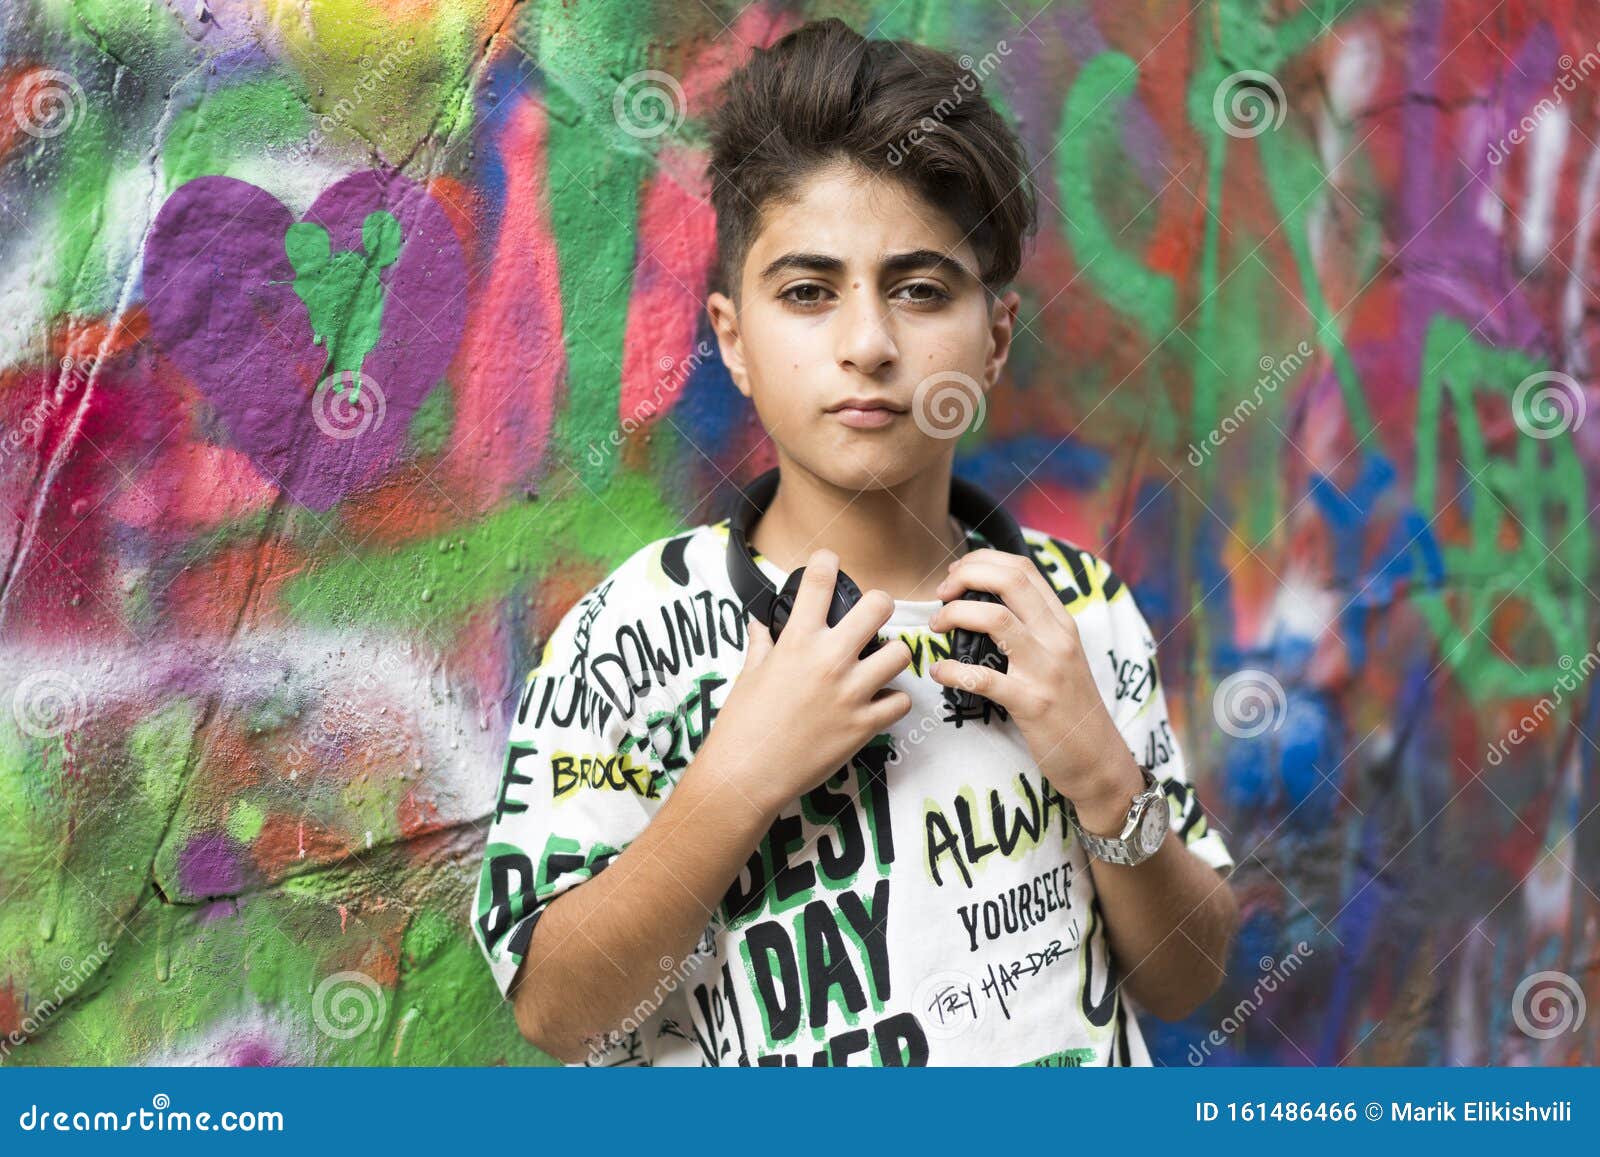 boy portrait with earphones and grafiti behind